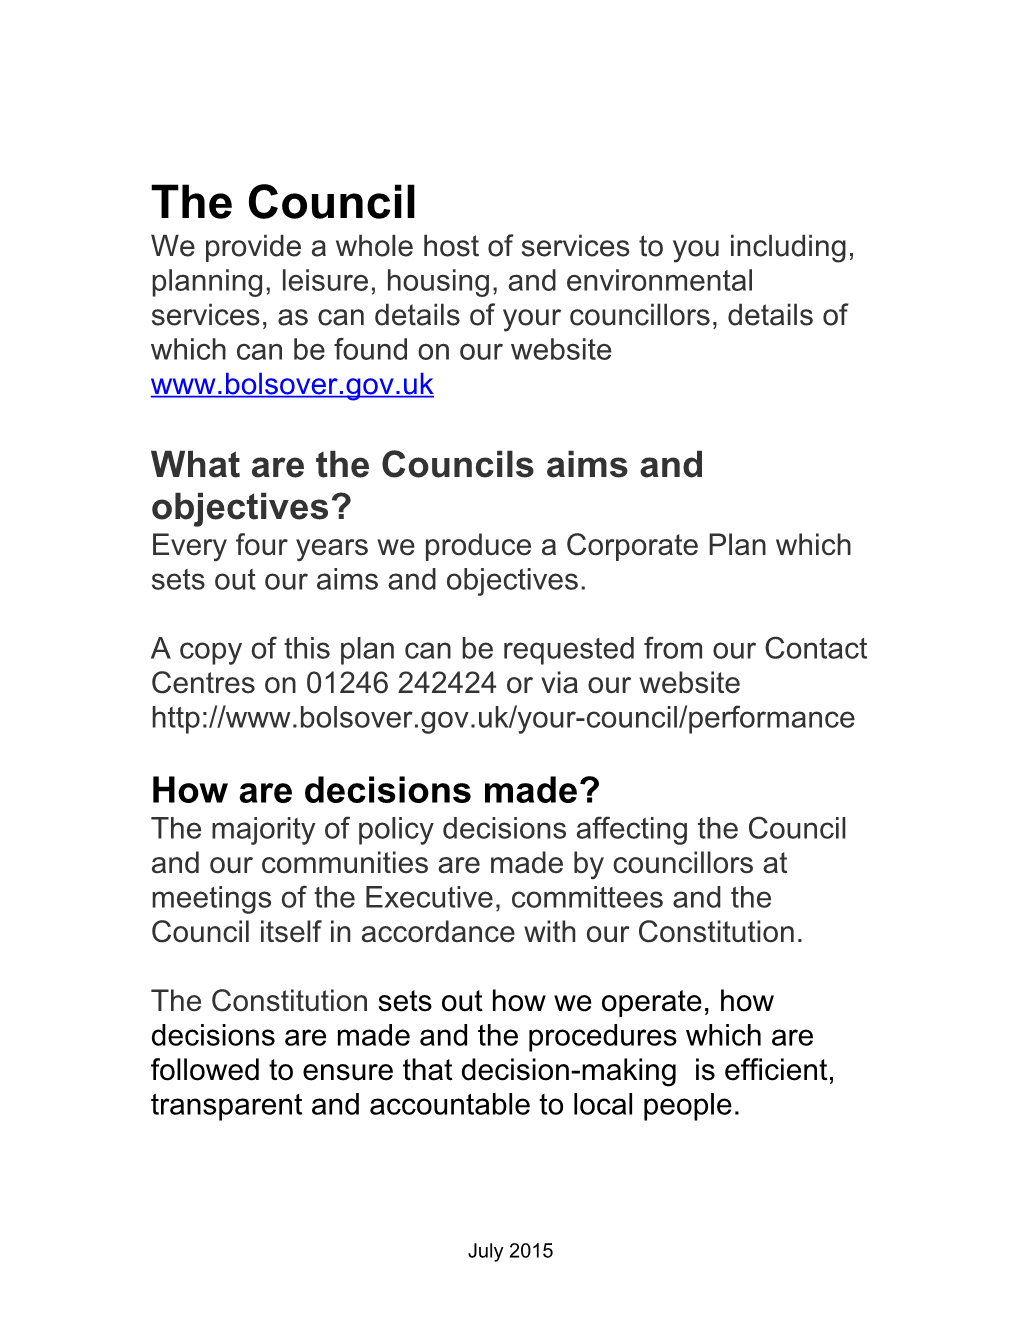 What Are the Councils Aims and Objectives?